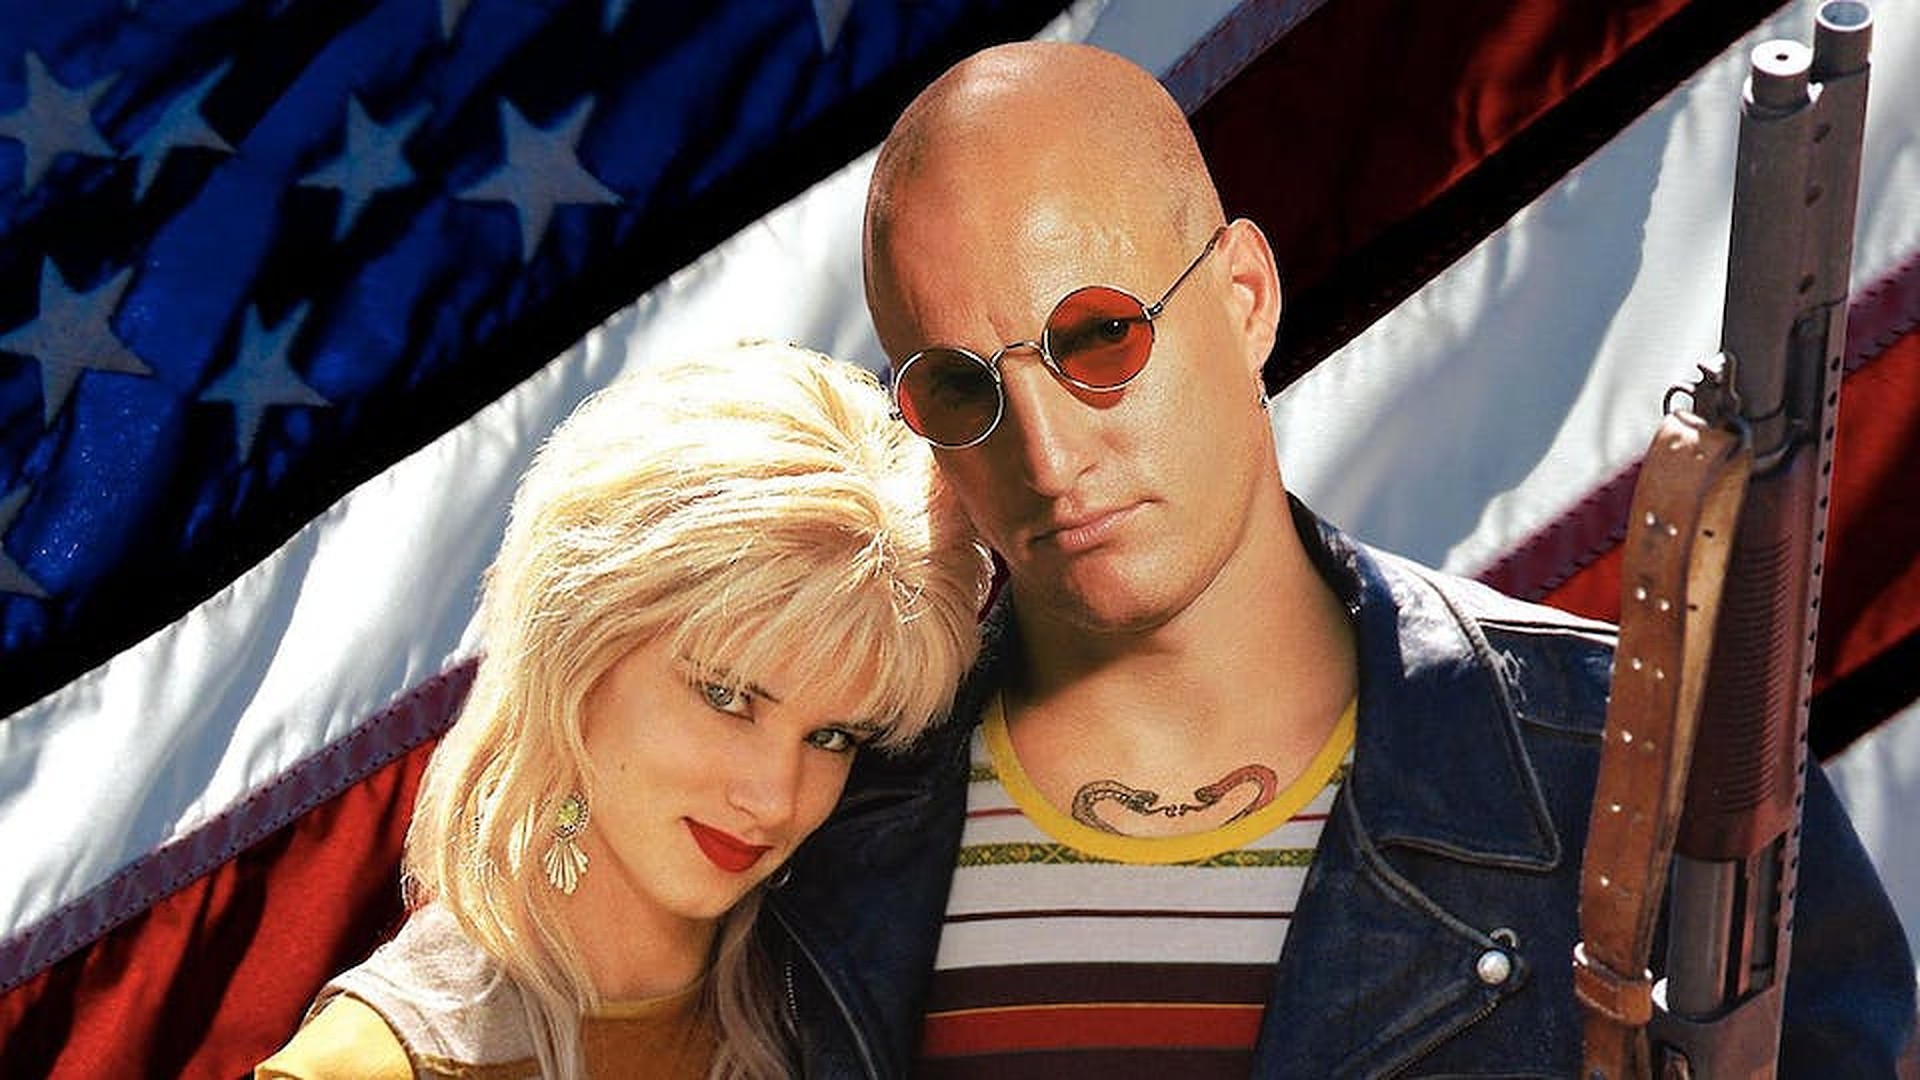 Who Were The Real Natural Born Killers? Is The Film Based On A True Story?